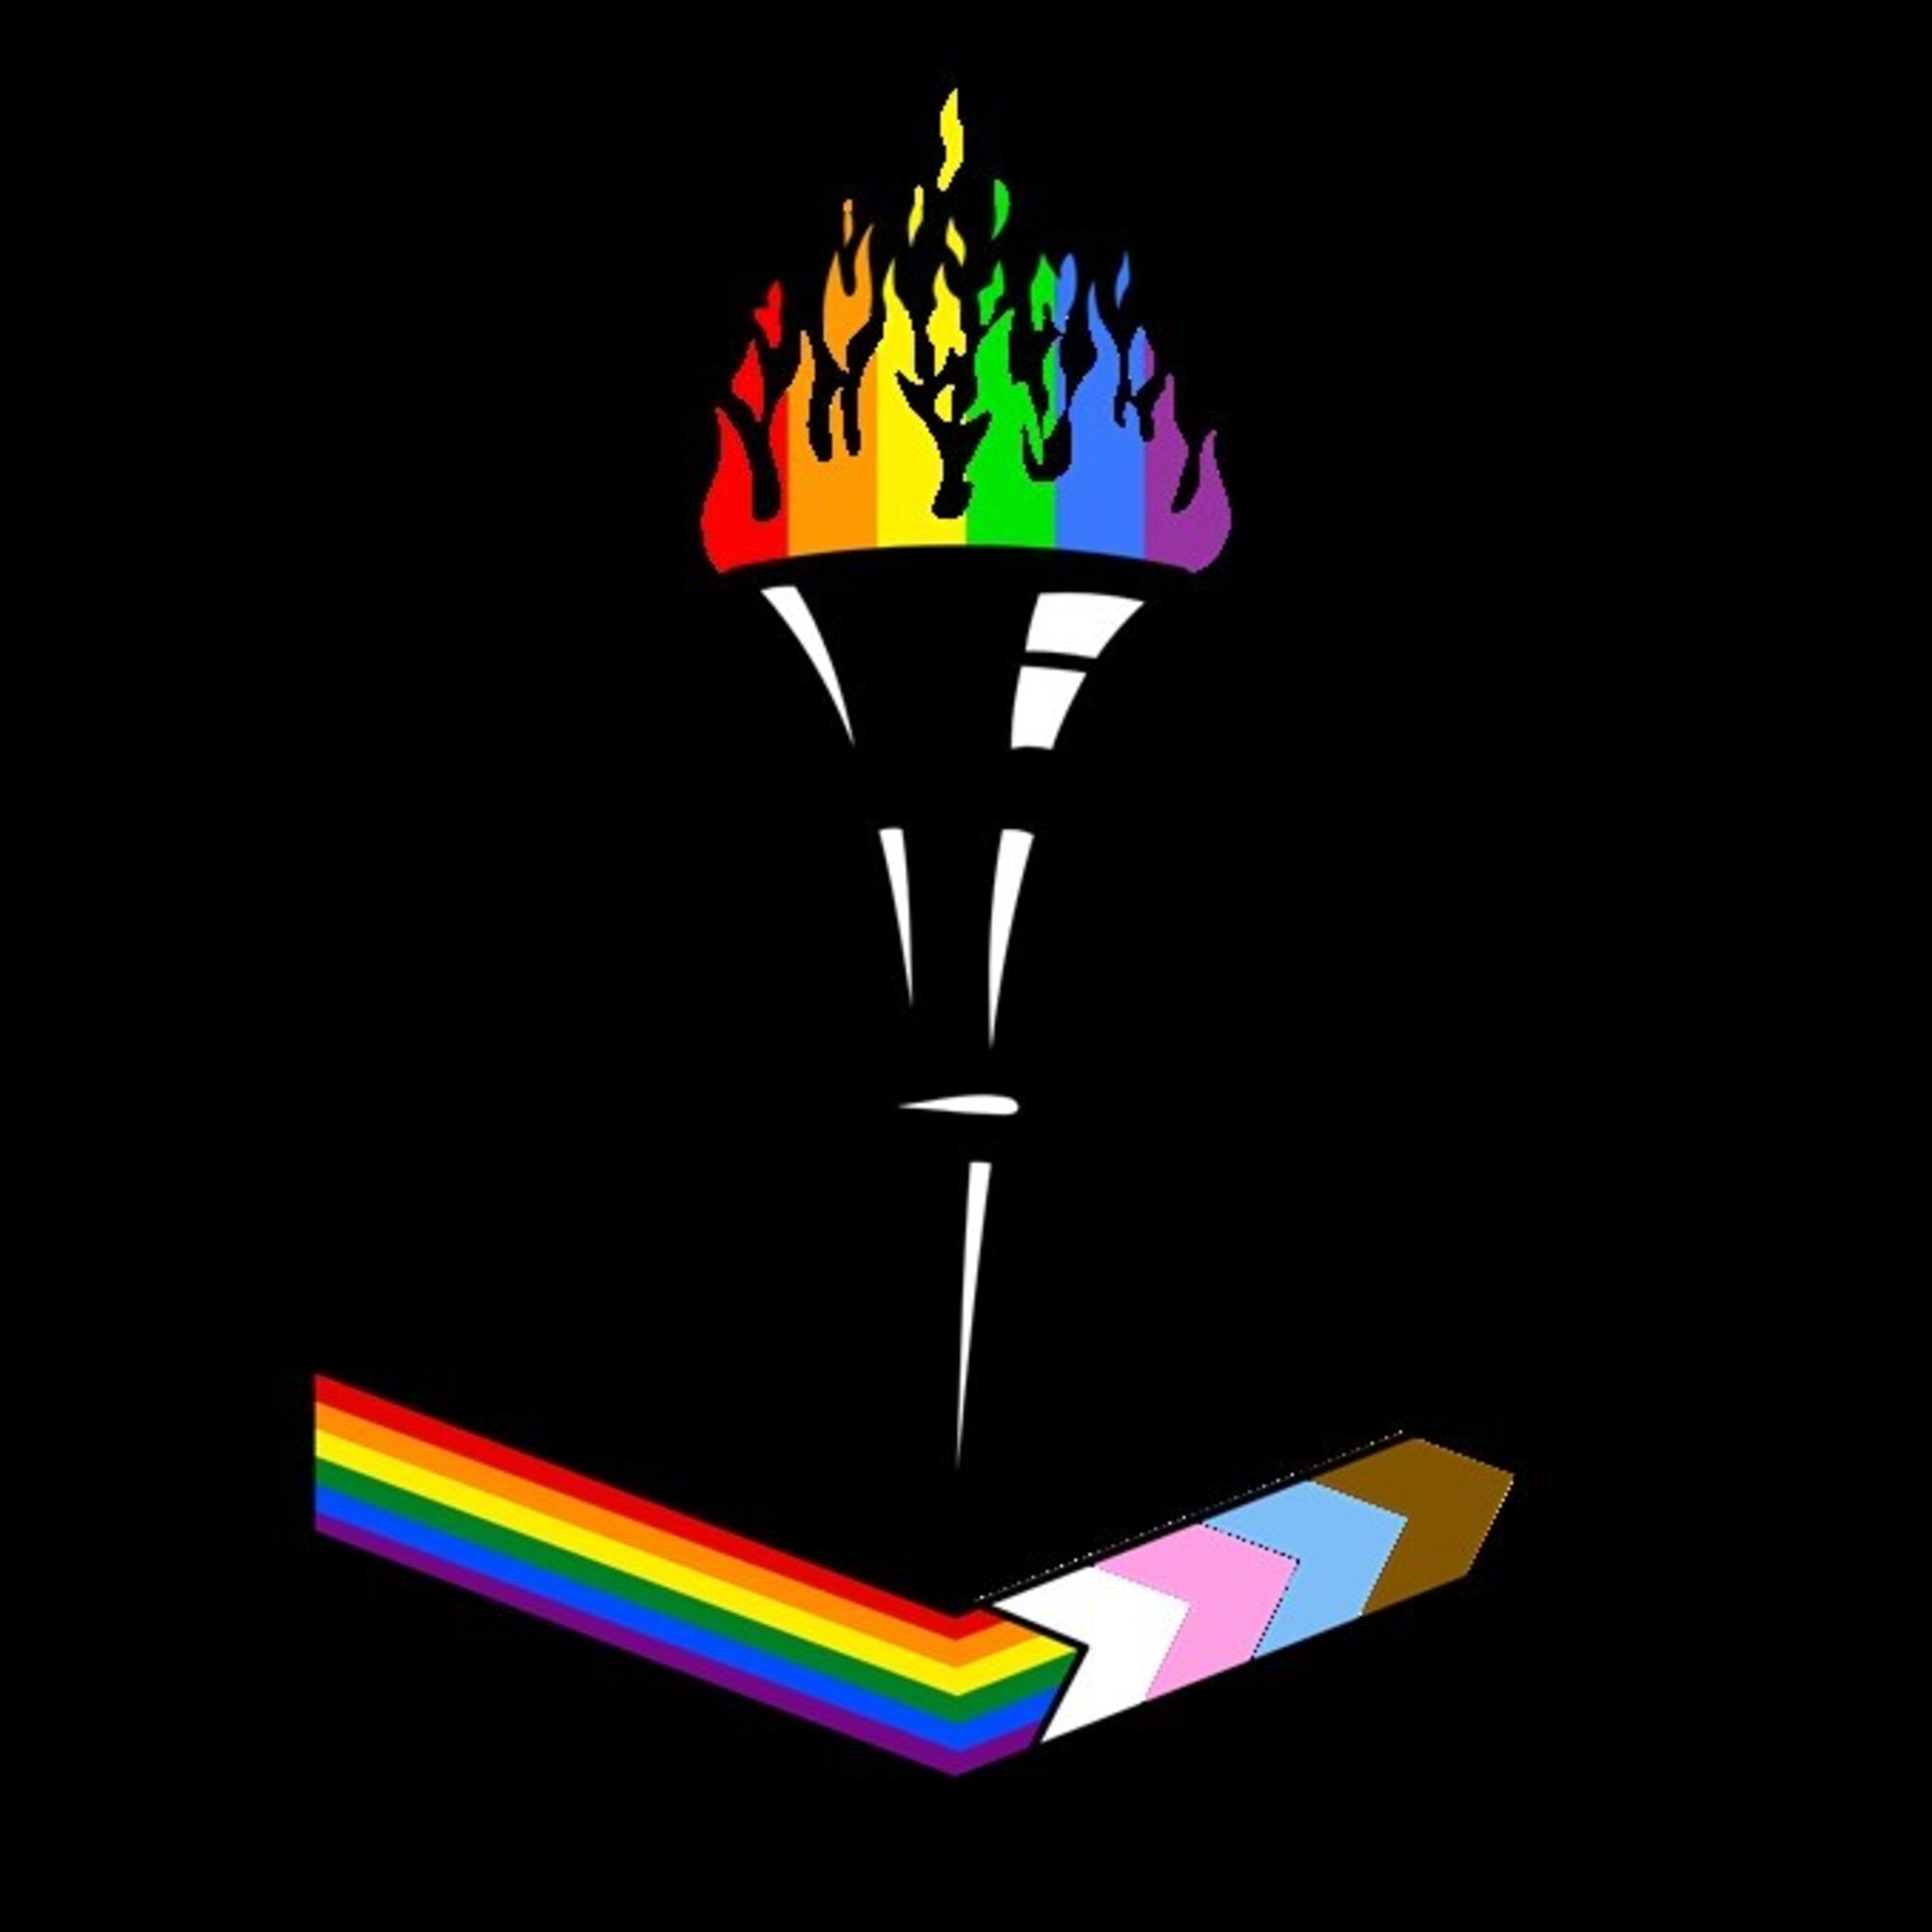 The LIT Flag represents the Lesbian, Gay, Bisexual, Transgender and Queer/Questioning Initiative Team created under the umbrella of its Department of the Air Force Barrier Analysis Working Group.